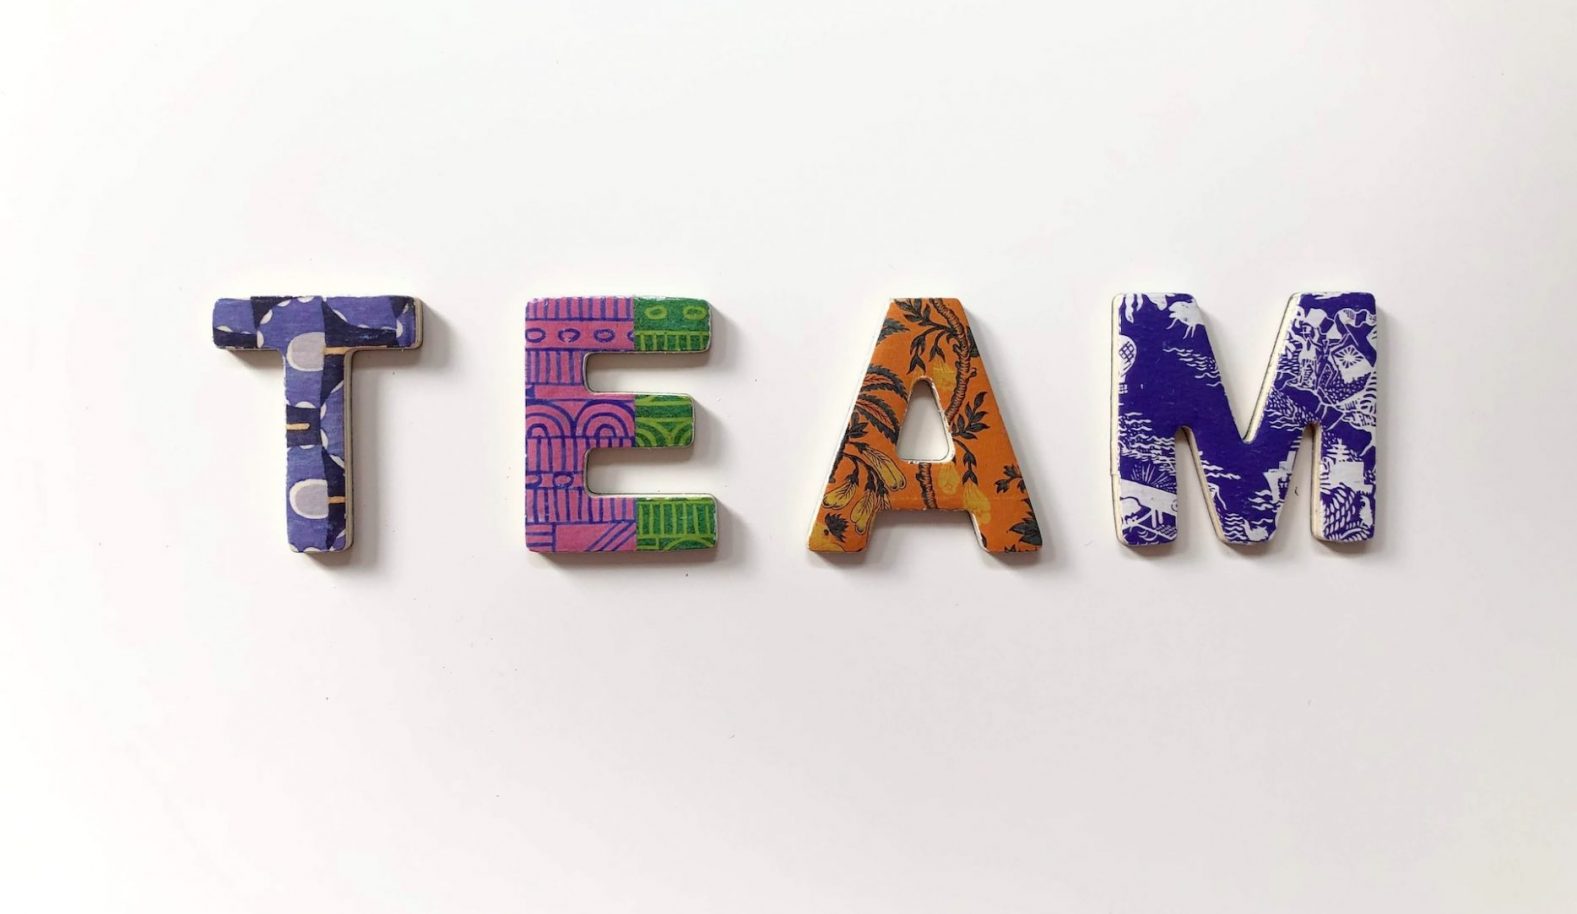 The word "team" spelled out